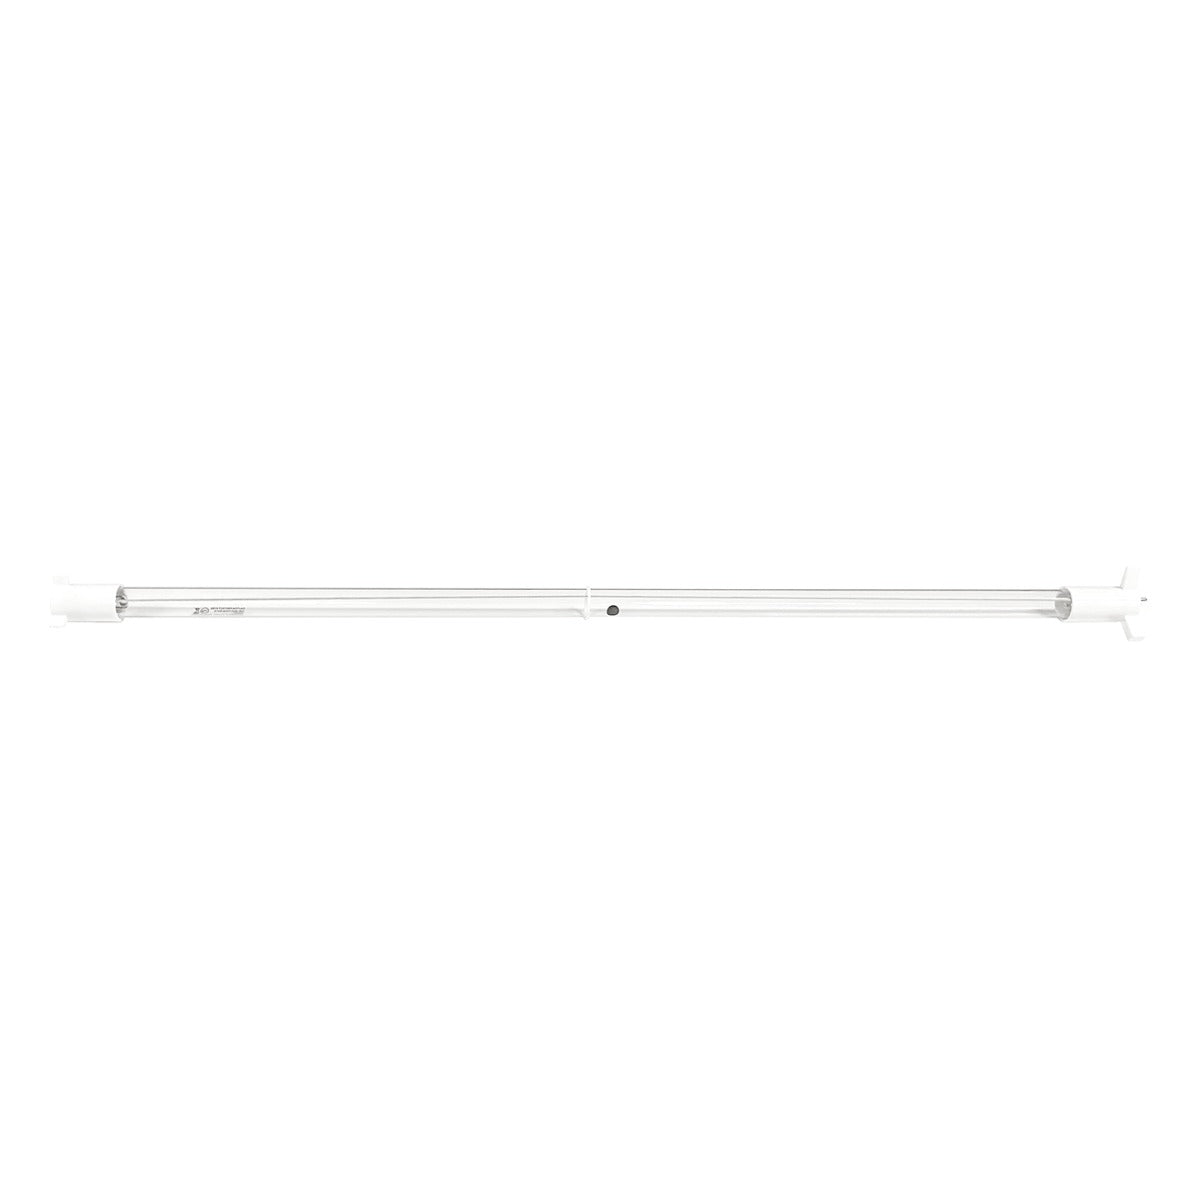 USWF Replacement for 602856 UV Lamp | Fits the VIQUA J/J+/K/K+, Pro 30, Pro 50, S80, SM80, & SV50 Series UV Systems